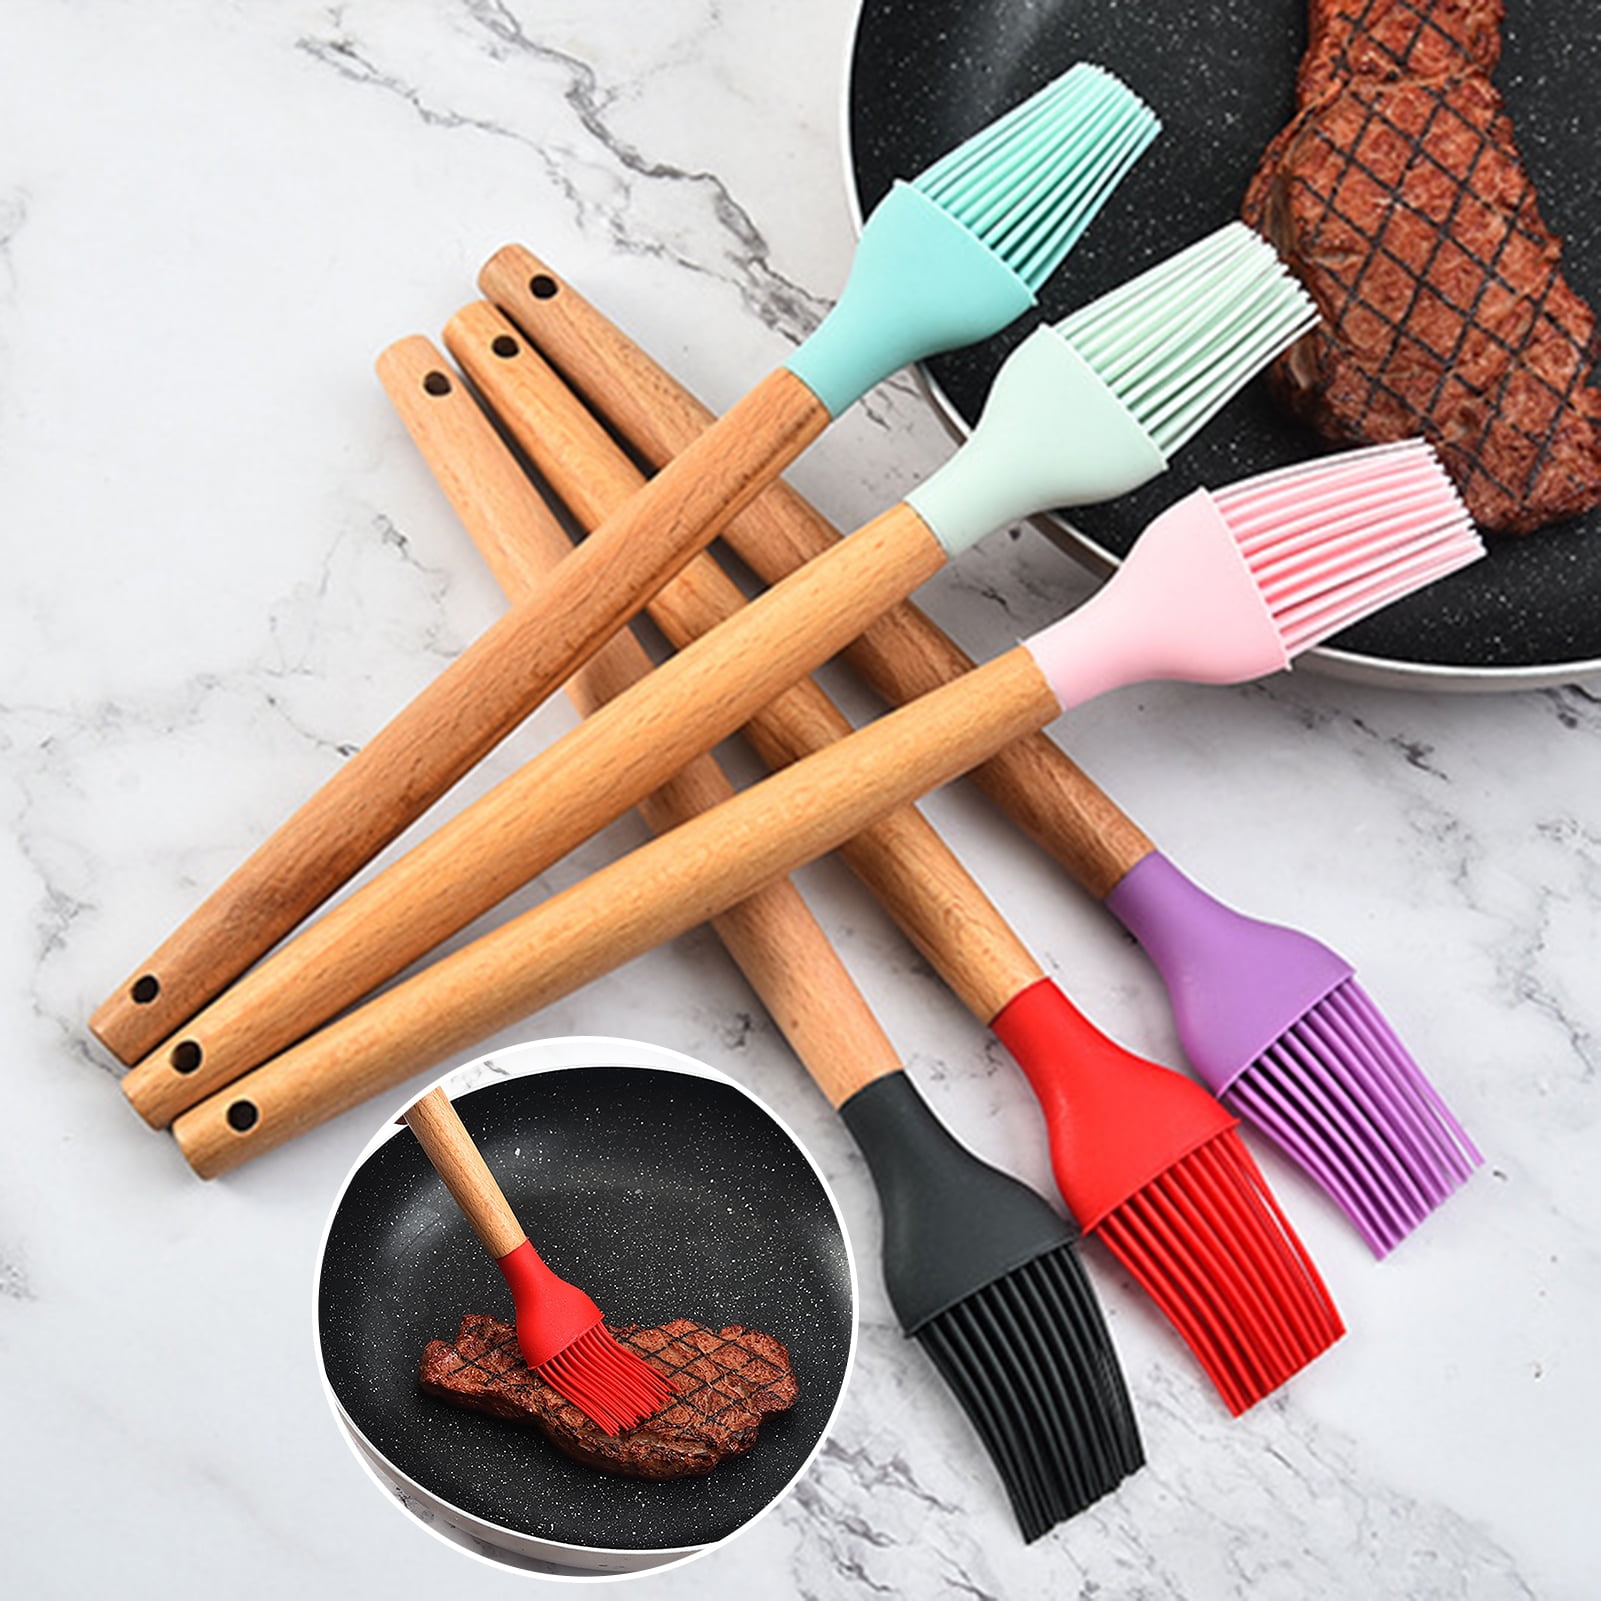 Silicon Basting Brushes, Heat Resistant Pastry Brushes, Silicone